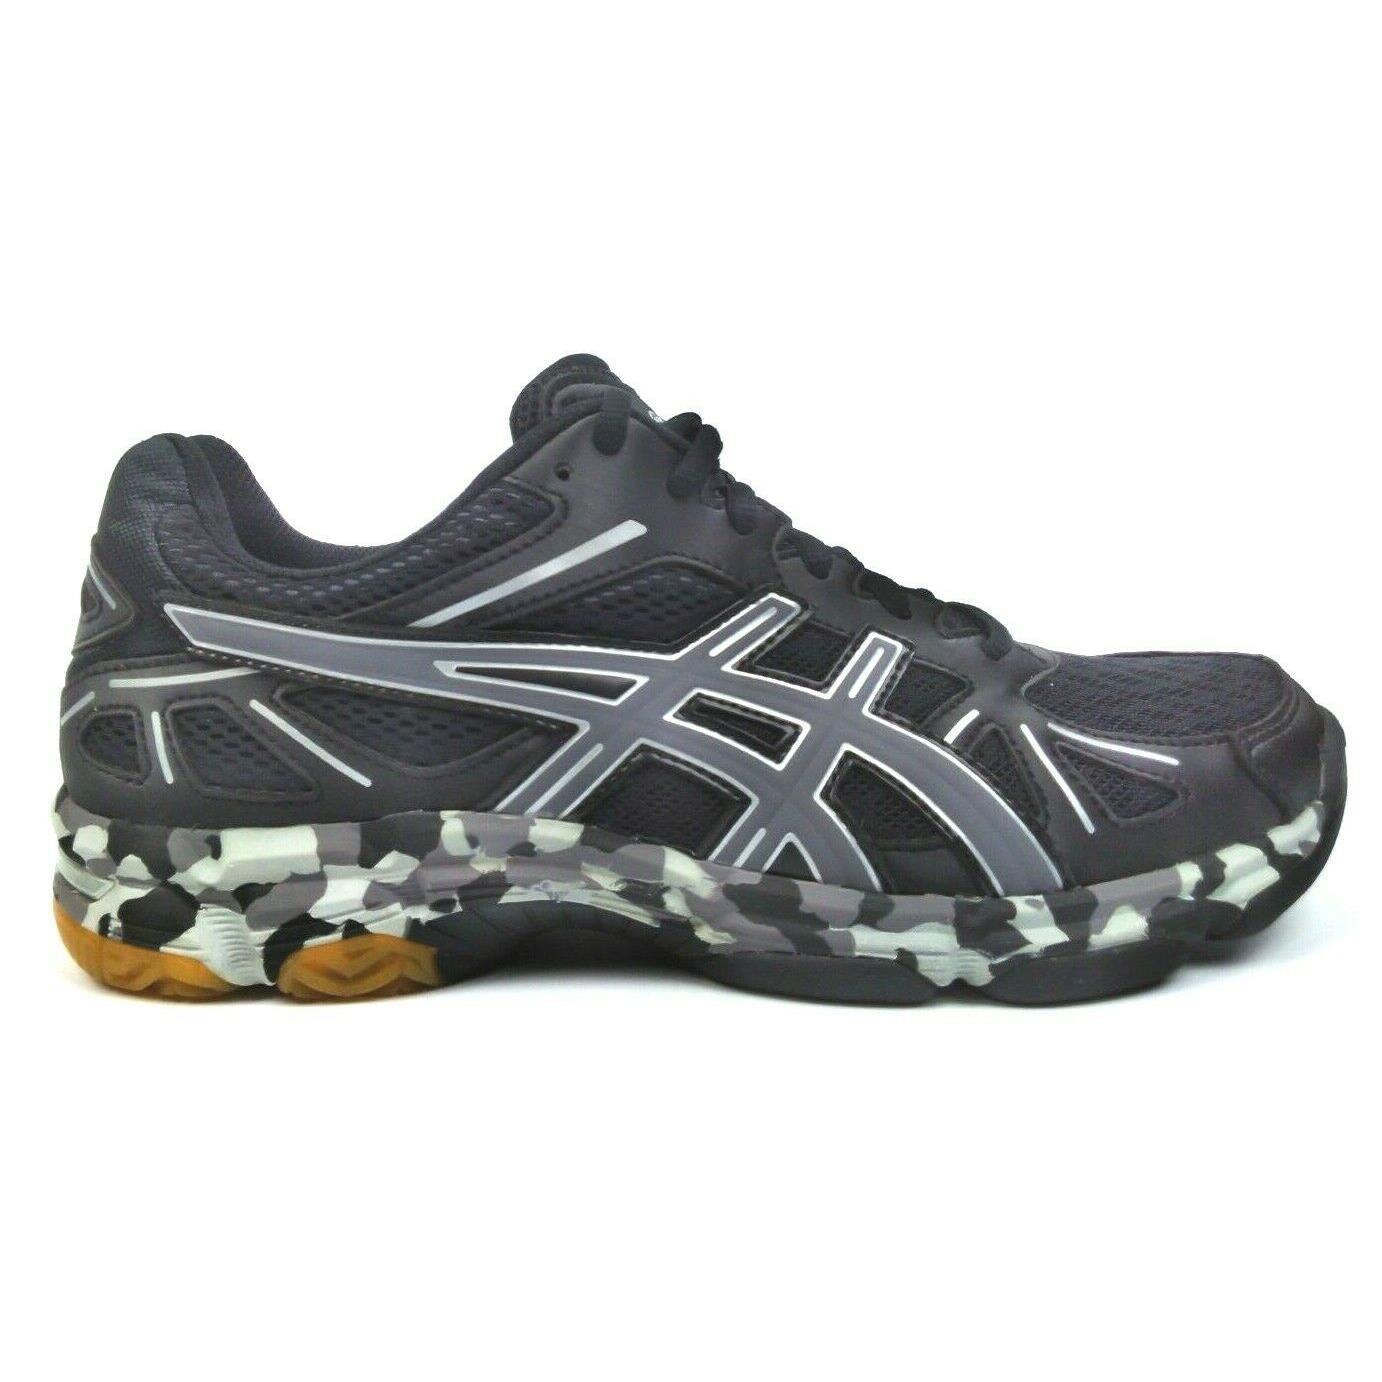 Asics Women`s Flashpoint Round Toe Lace Up Cross Training Shoes Black Silver